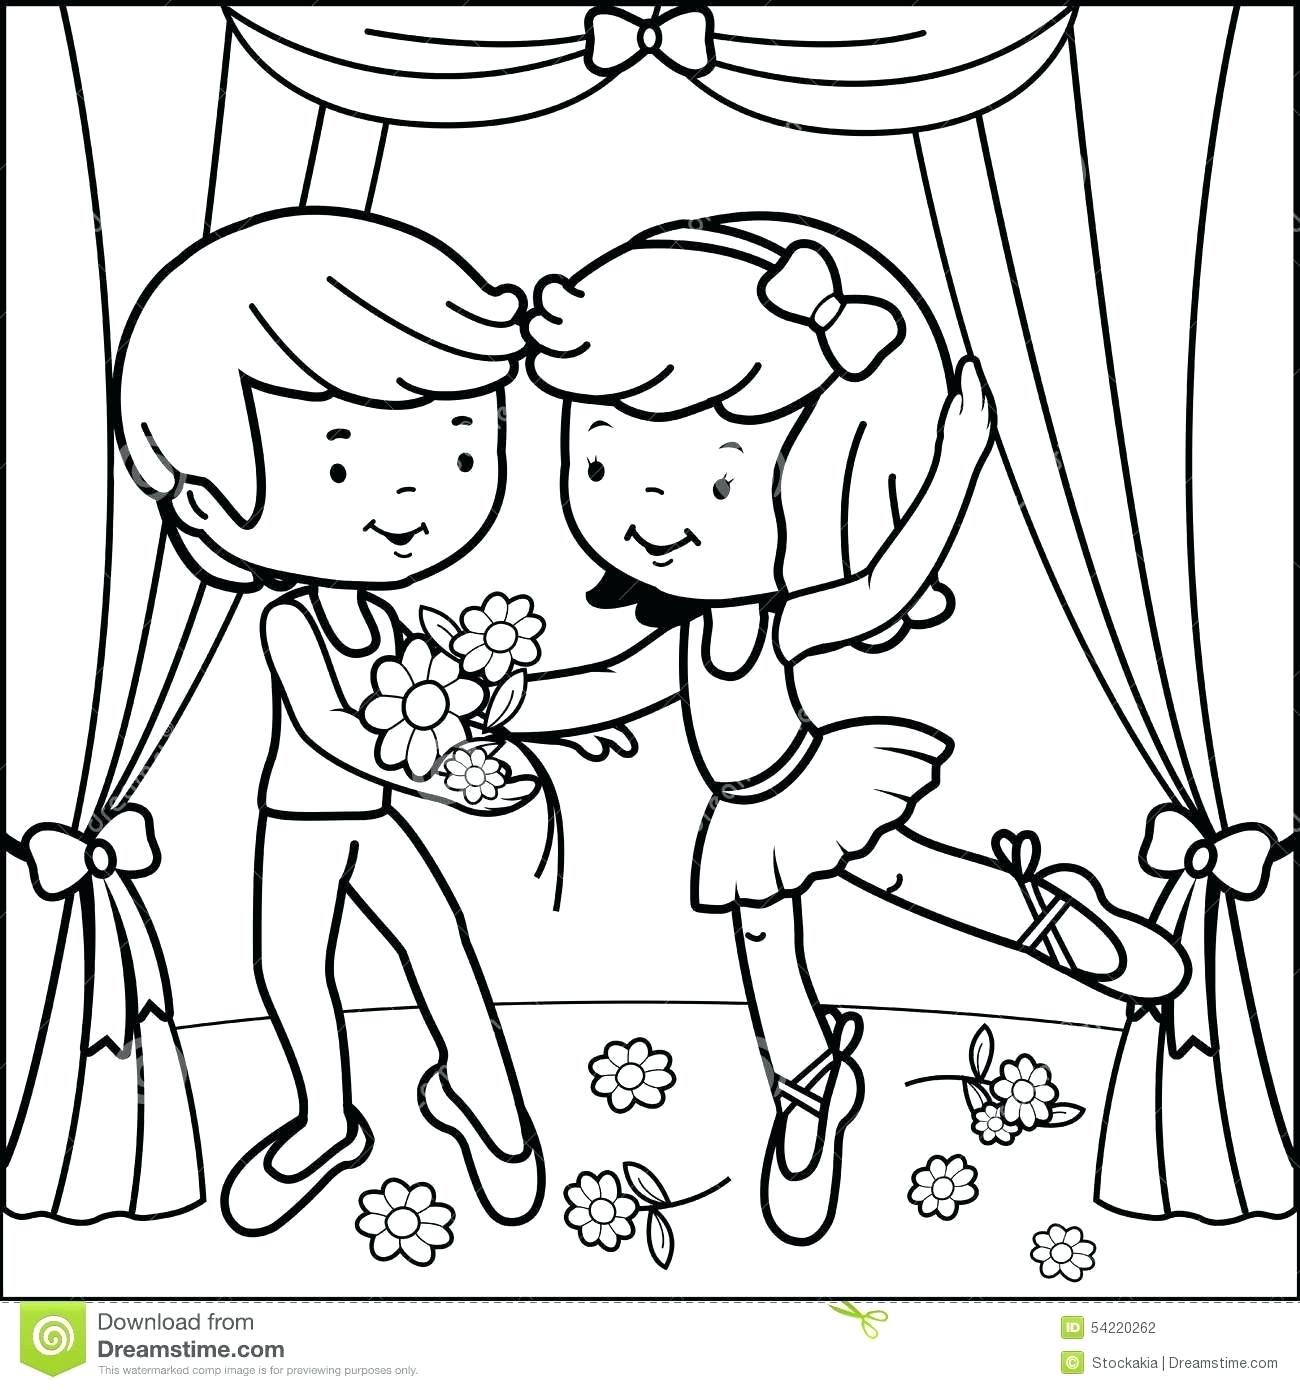 Dancing Coloring Pages Ballet Dancer Coloring Pages Free Fiestaprintco